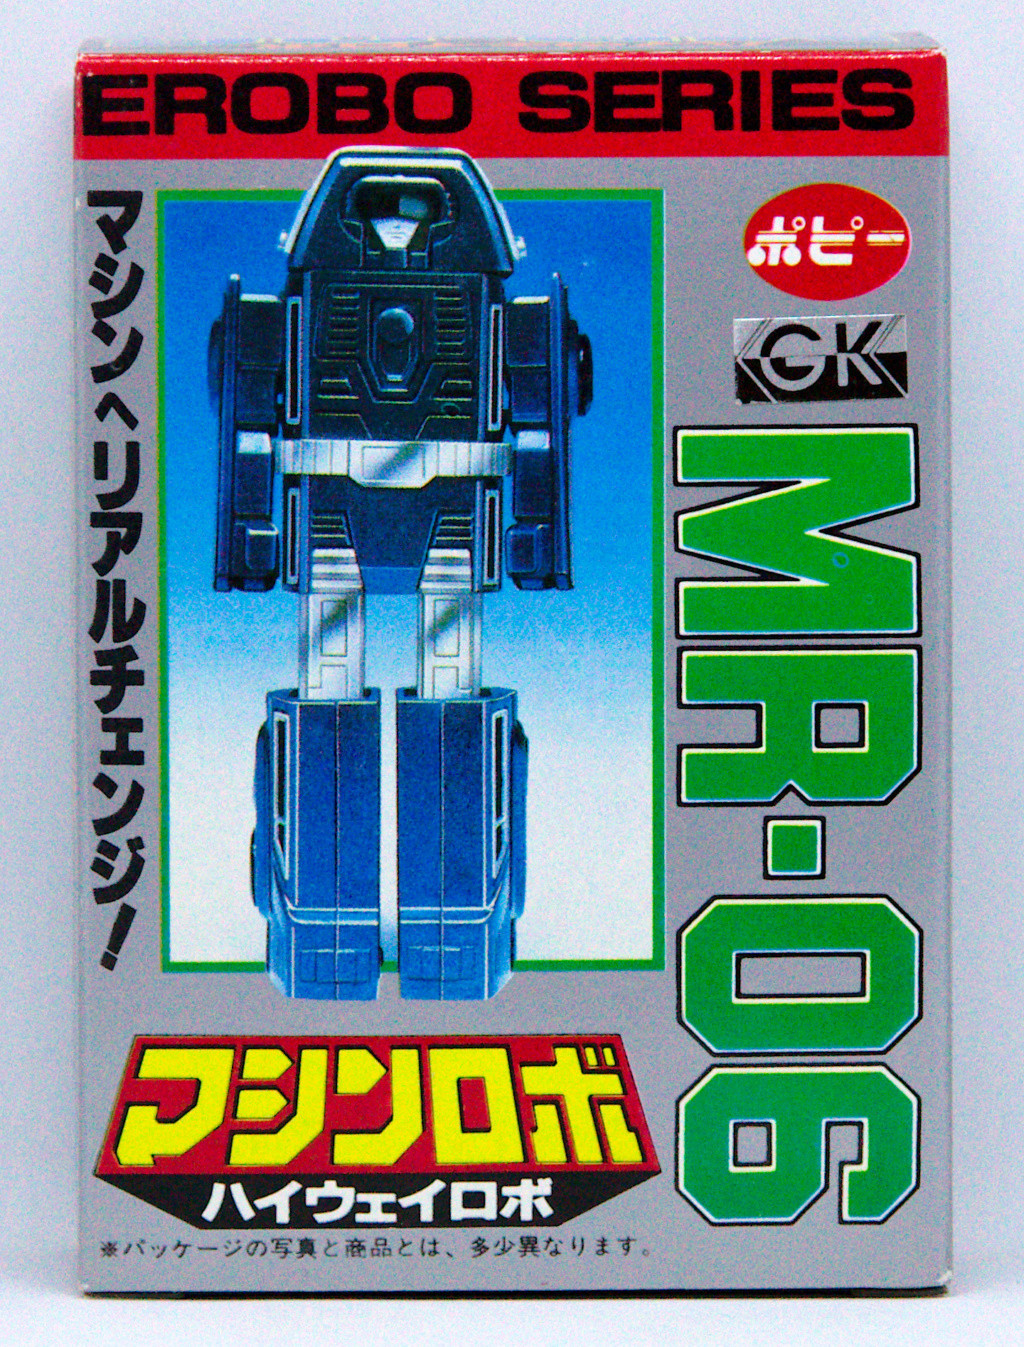 Pilgrim's collection (Gobots, Transformers...) - Page 27 Img_8510